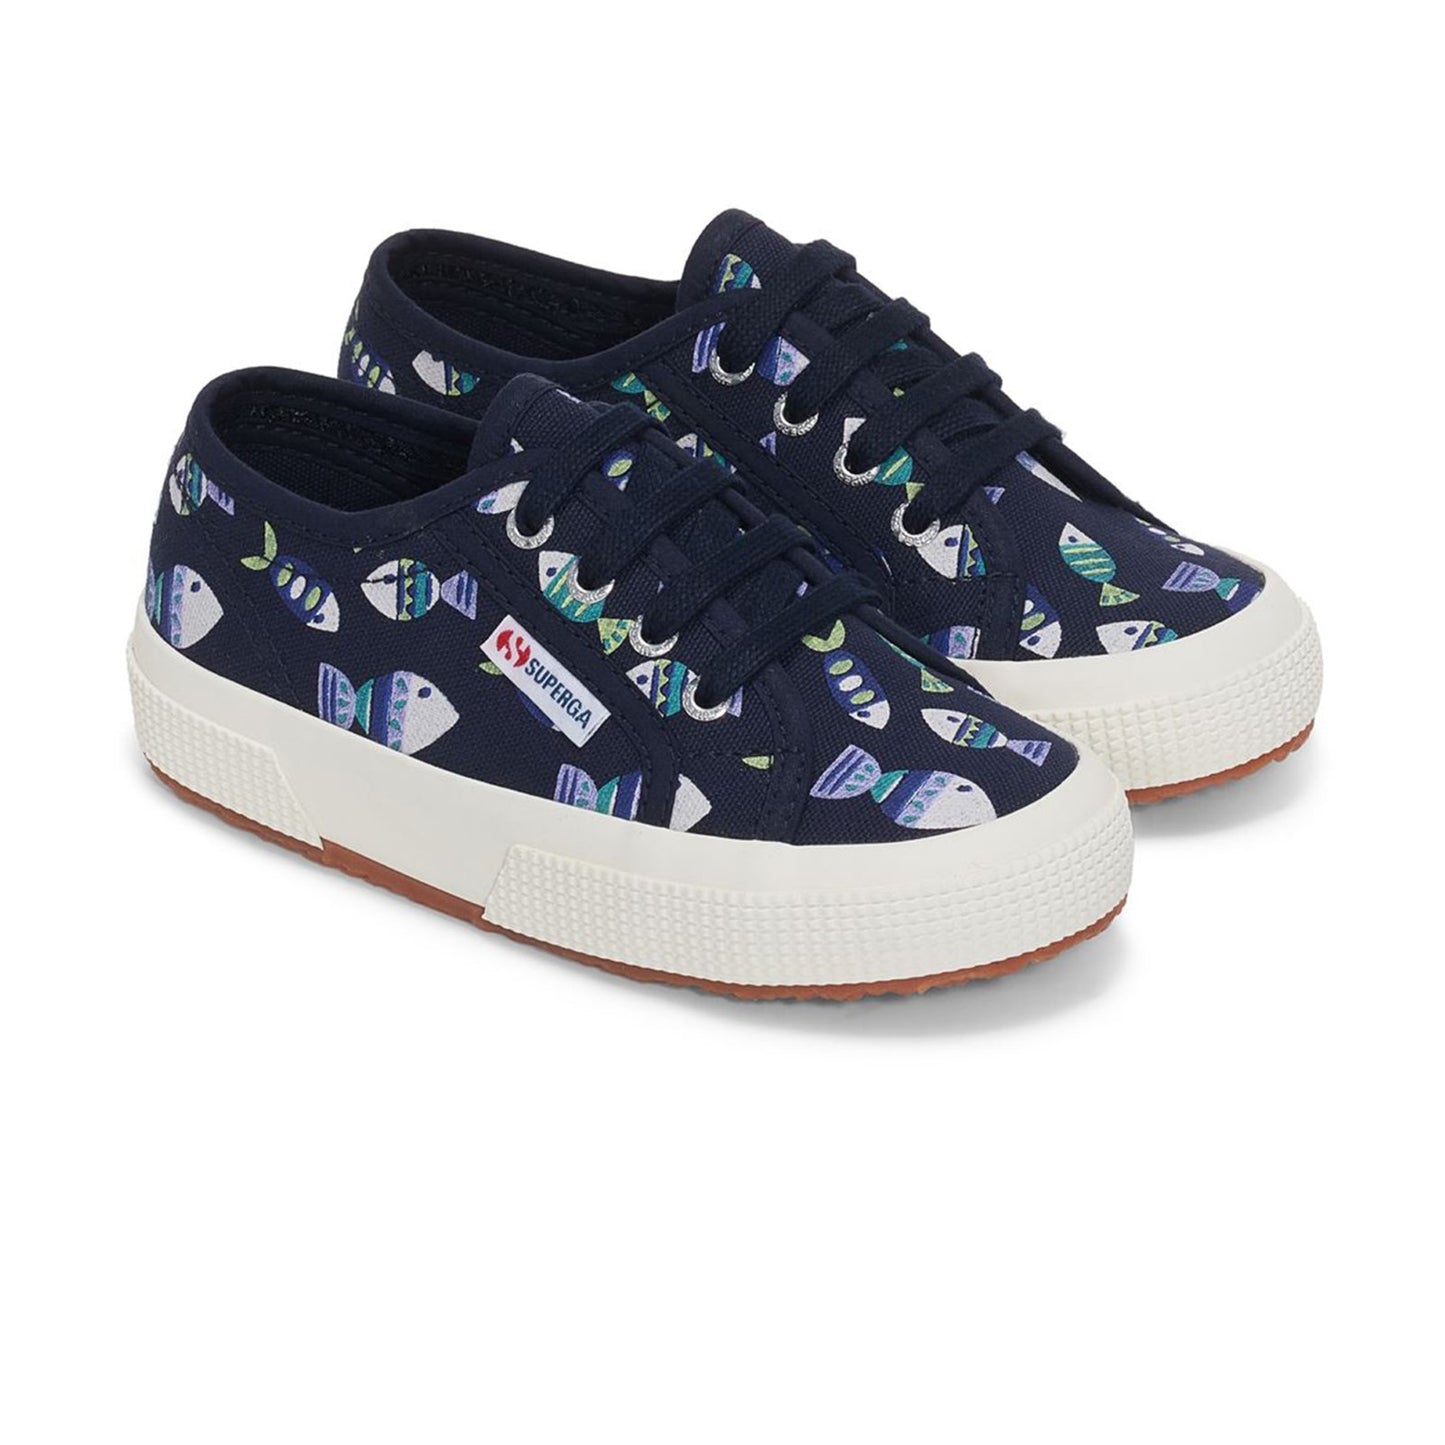 2750 KID CANDY FISH - BLUE NAVY CANDY